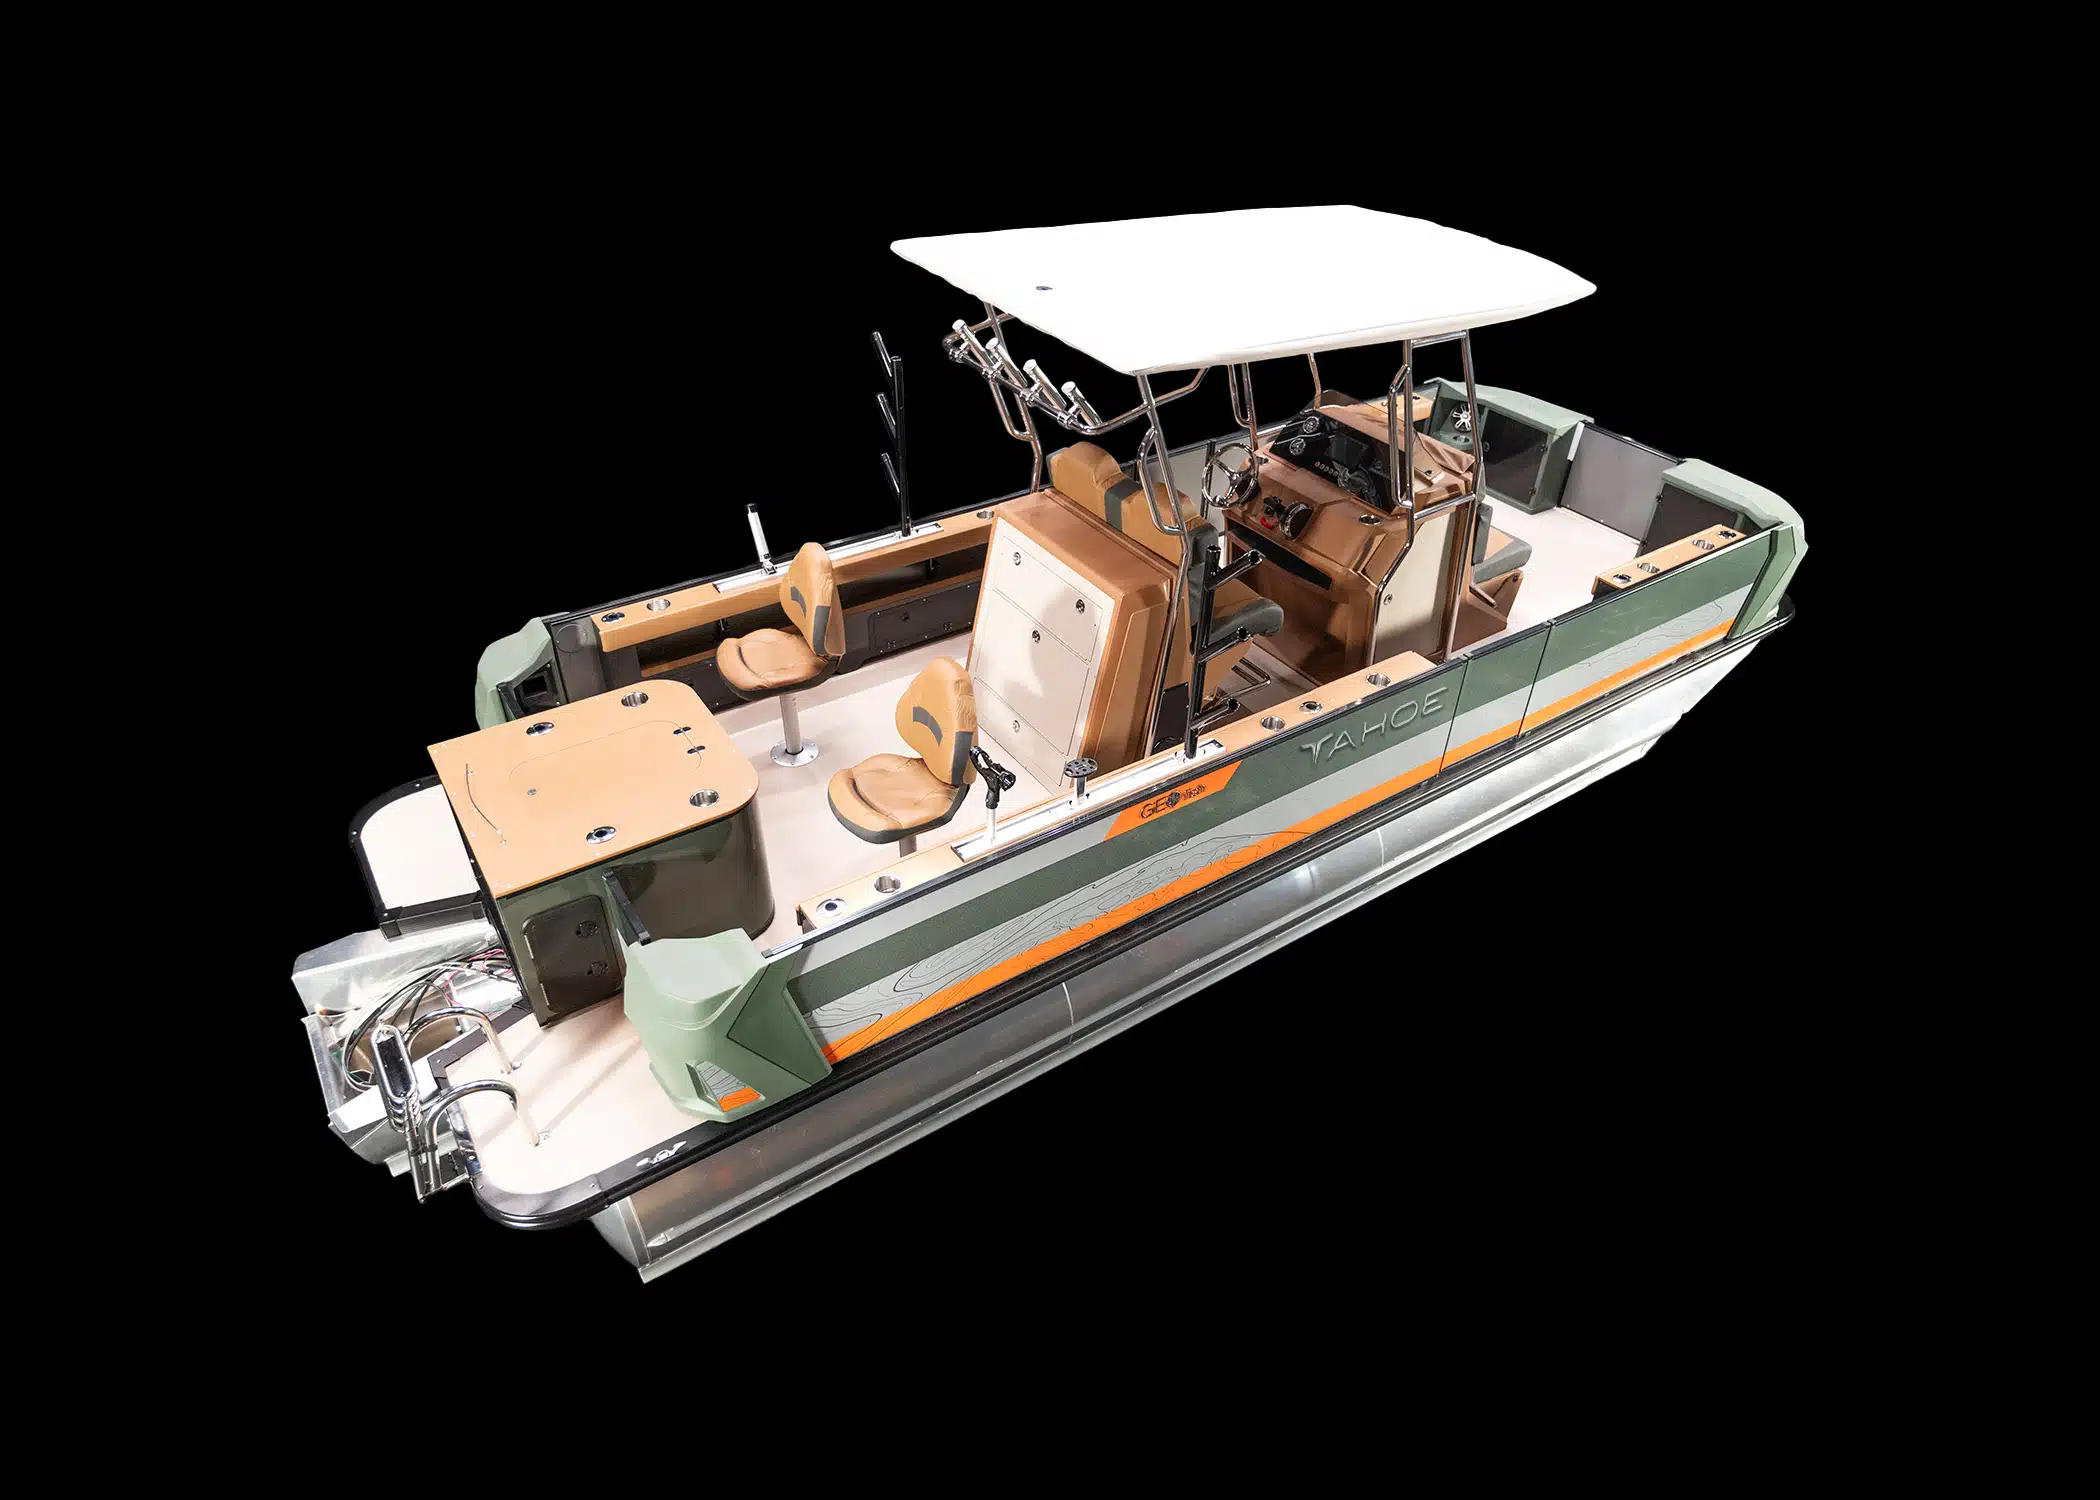 Pontoon Boat Accessories: Fun Options for New Boats